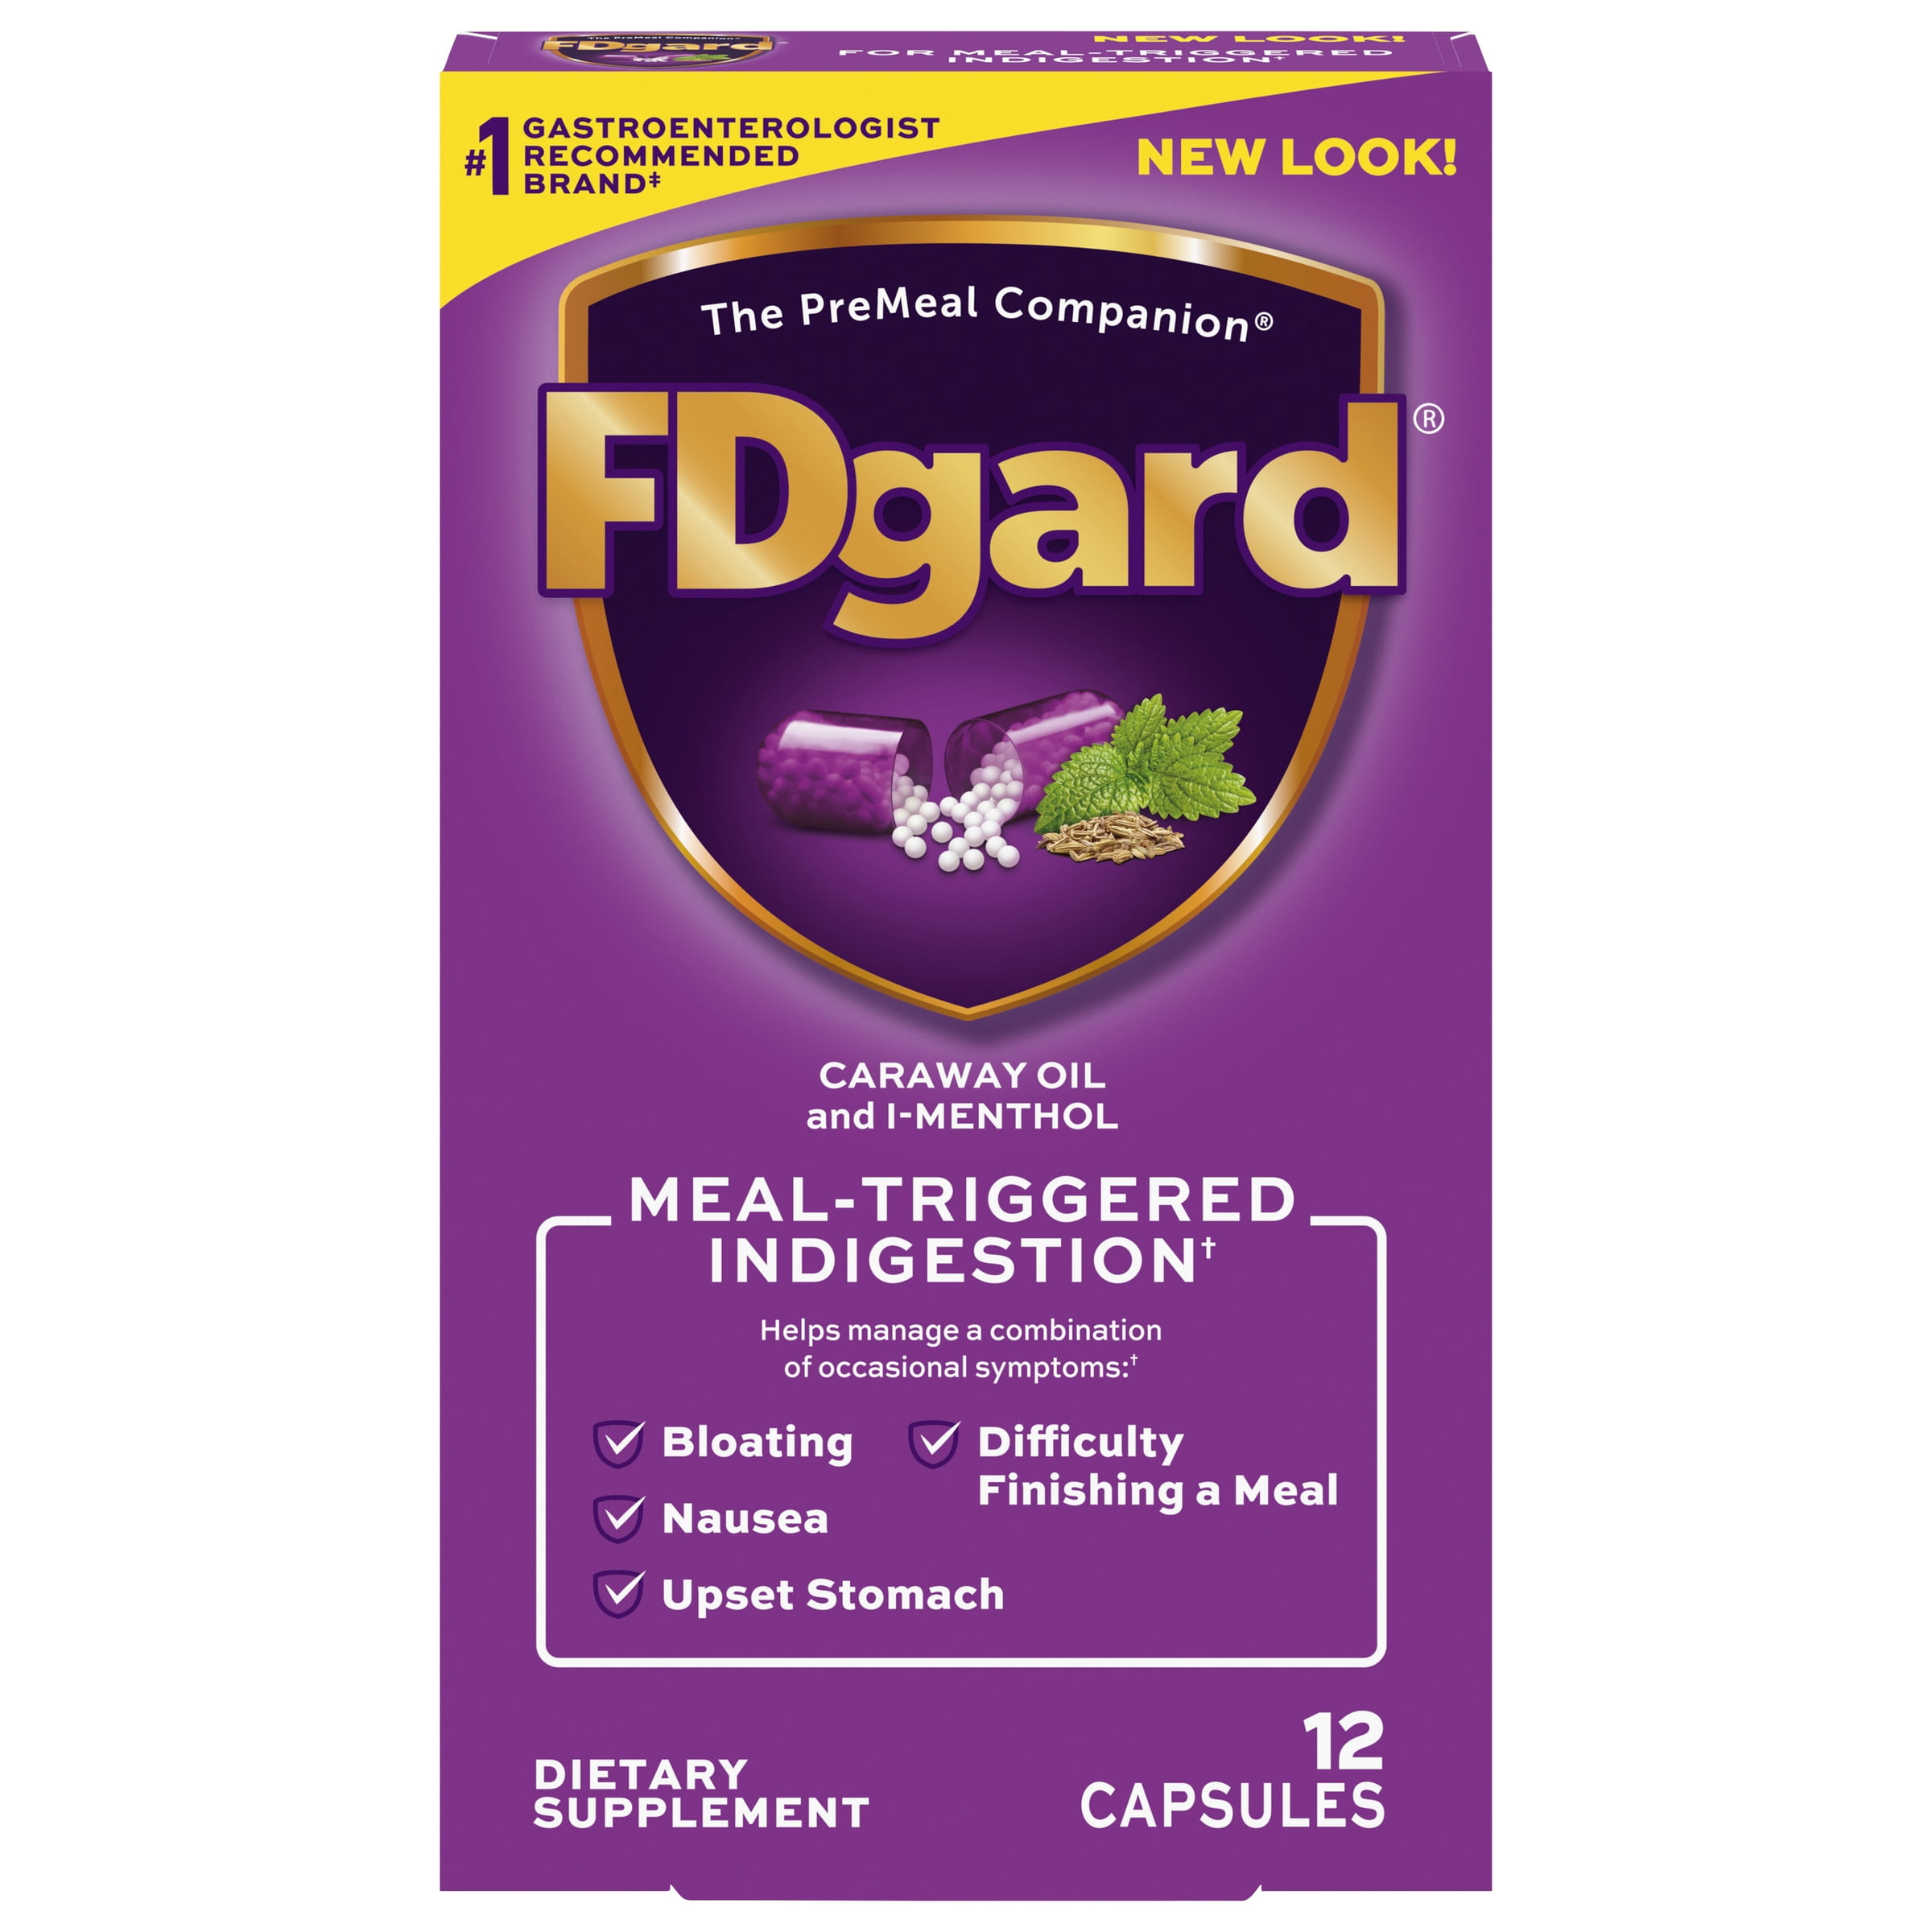 FDgard Dietary Supplement to Help Manage Meal-Triggered Indigestion, 12 Capsules